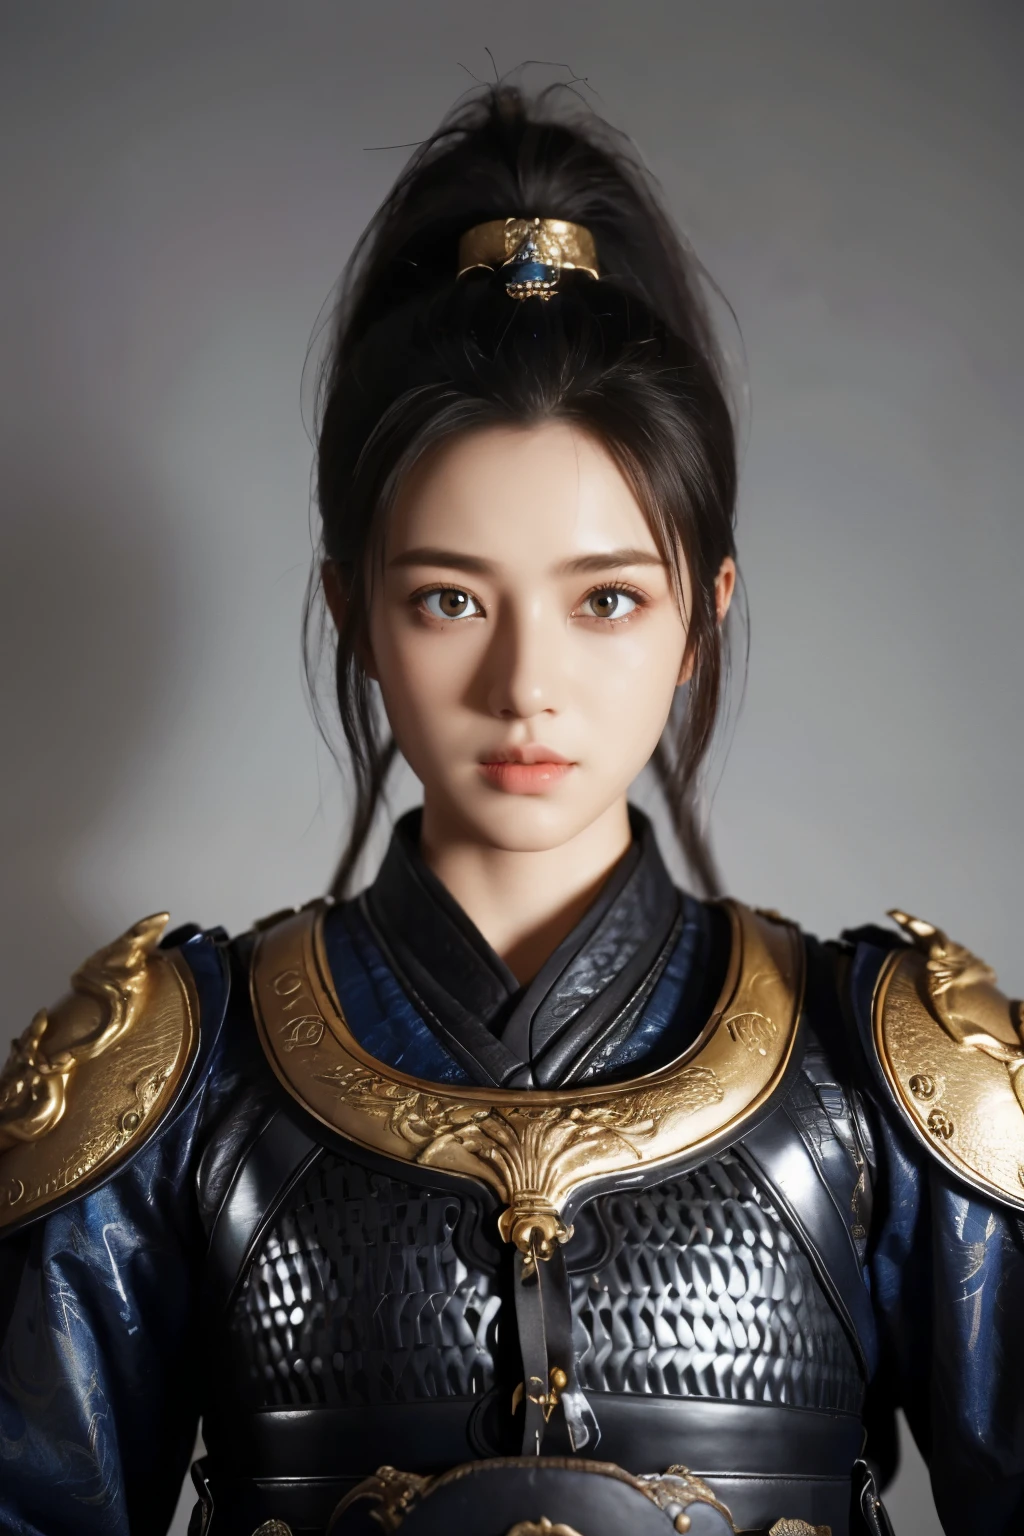 Game art，The best picture quality，Highest resolution，8K，(A bust photograph)，(Portrait)，(Head close-up)，(Rule of thirds)，Unreal Engine 5 rendering works， (The Girl of the Future)，(Female Warrior)， 
20-year-old girl，(The generals of ancient China)，An eye rich in detail，(Big breasts)，Elegant and noble，indifferent，brave，
(Wearing ancient Chinese style armor，Armor of the Tang Dynasty，Costumes are rich in detail，Metallic luster，Silver gray)，Chinese Characters，Fantasy style，
Photo poses，Field background，Movie lights，Ray tracing，Game CG，((3D Unreal Engine))，oc rendering reflection pattern